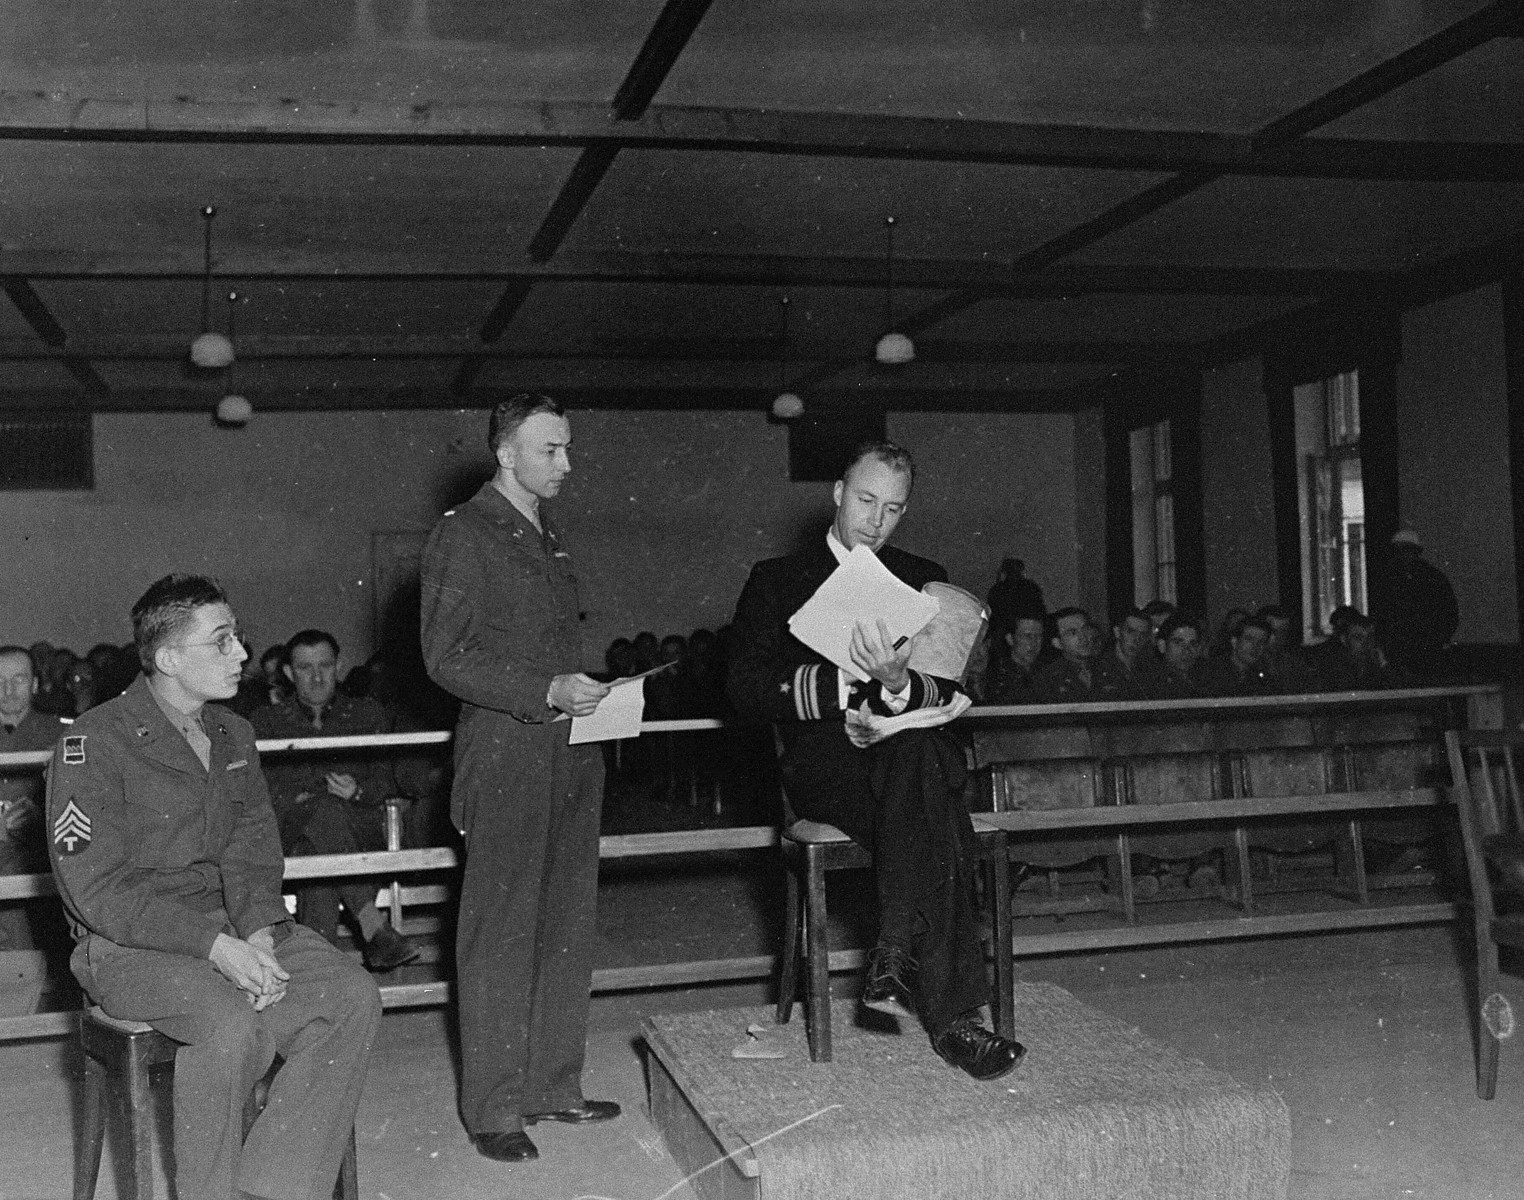 A witness testifies for the prosecution at the trial of 61 former camp personnel and prisoners from Mauthausen.  

Testifying is Lieutenant Jack Taylor (b. 1908).  Lt. Taylor served in the OSS (American Secret Service).  He was captured by the Germans and imprisoned in Mauthausen.  Also pictured are Herbert Rosenstock, an interpreter (far left) and U.S. prosecutor William Denson (middle).